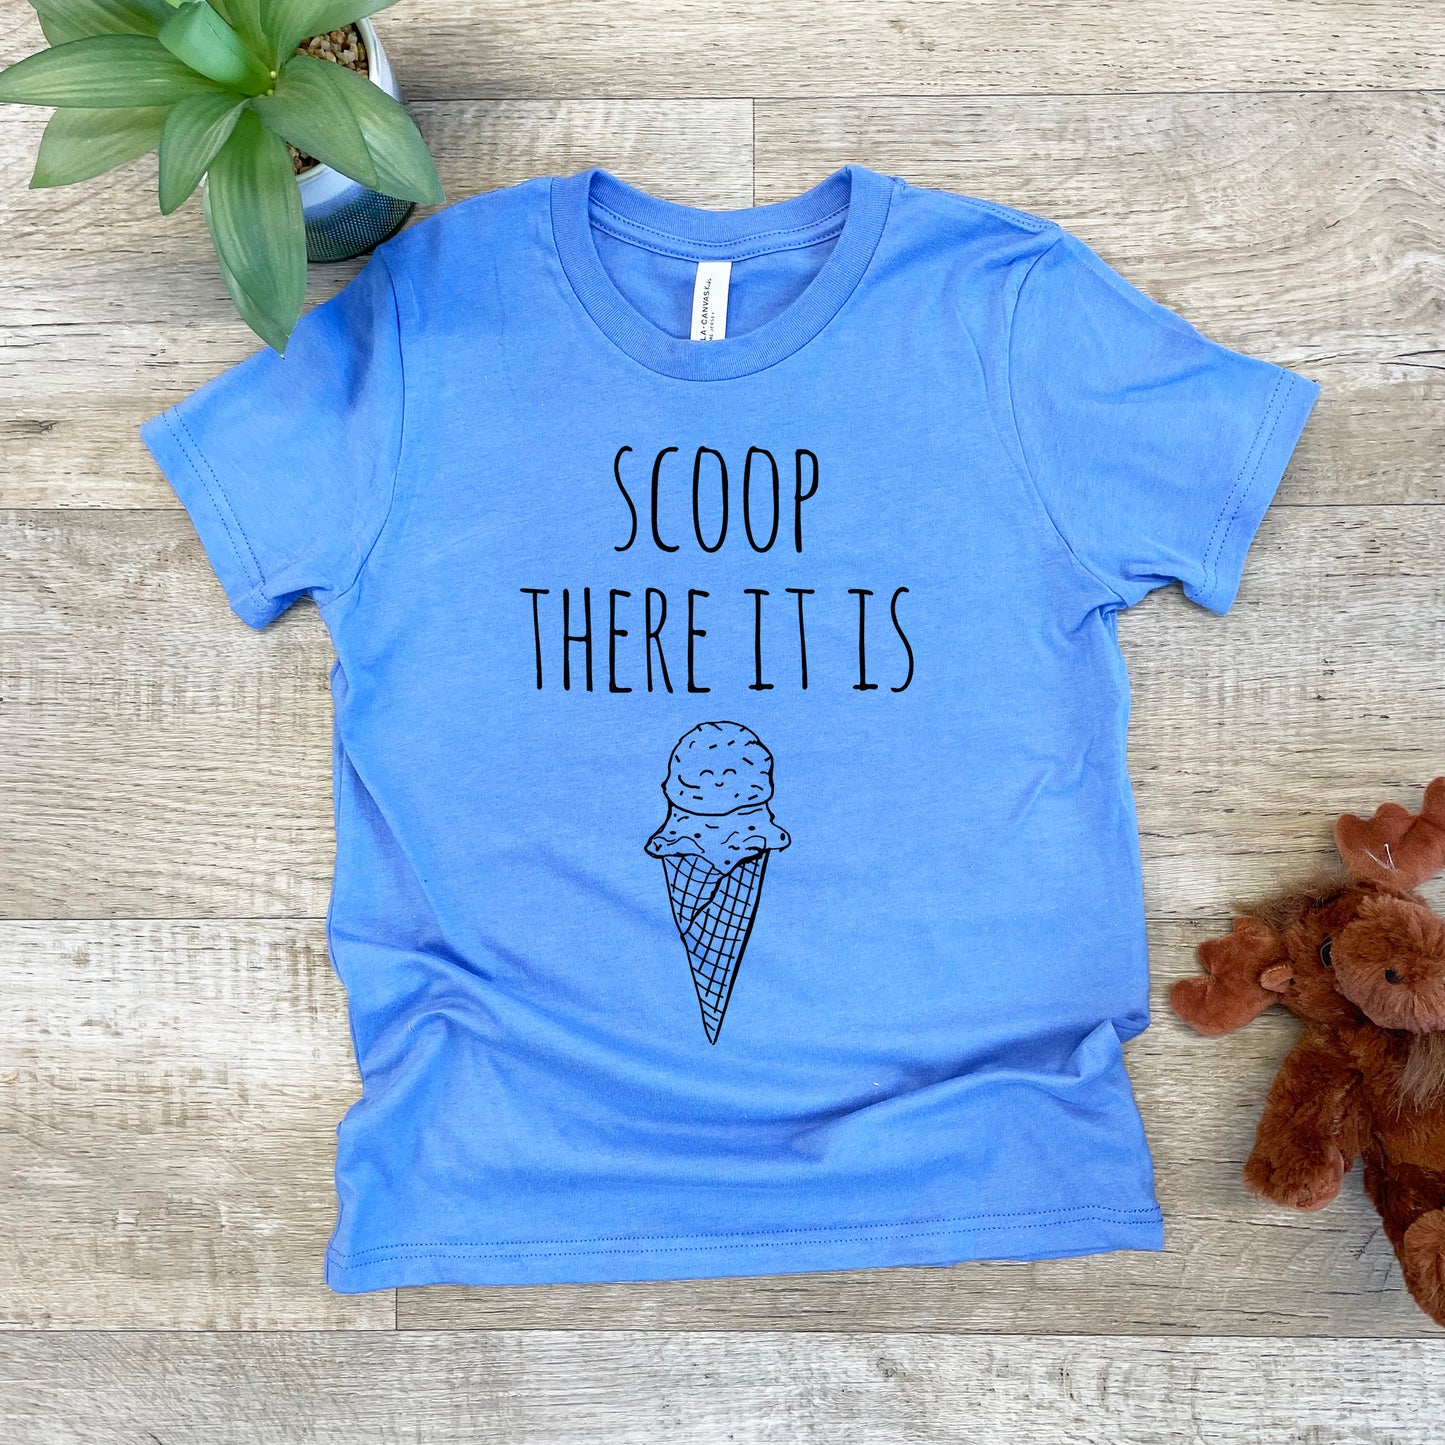 Scoop, There It Is - Kid's Tee - Columbia Blue or Lavender